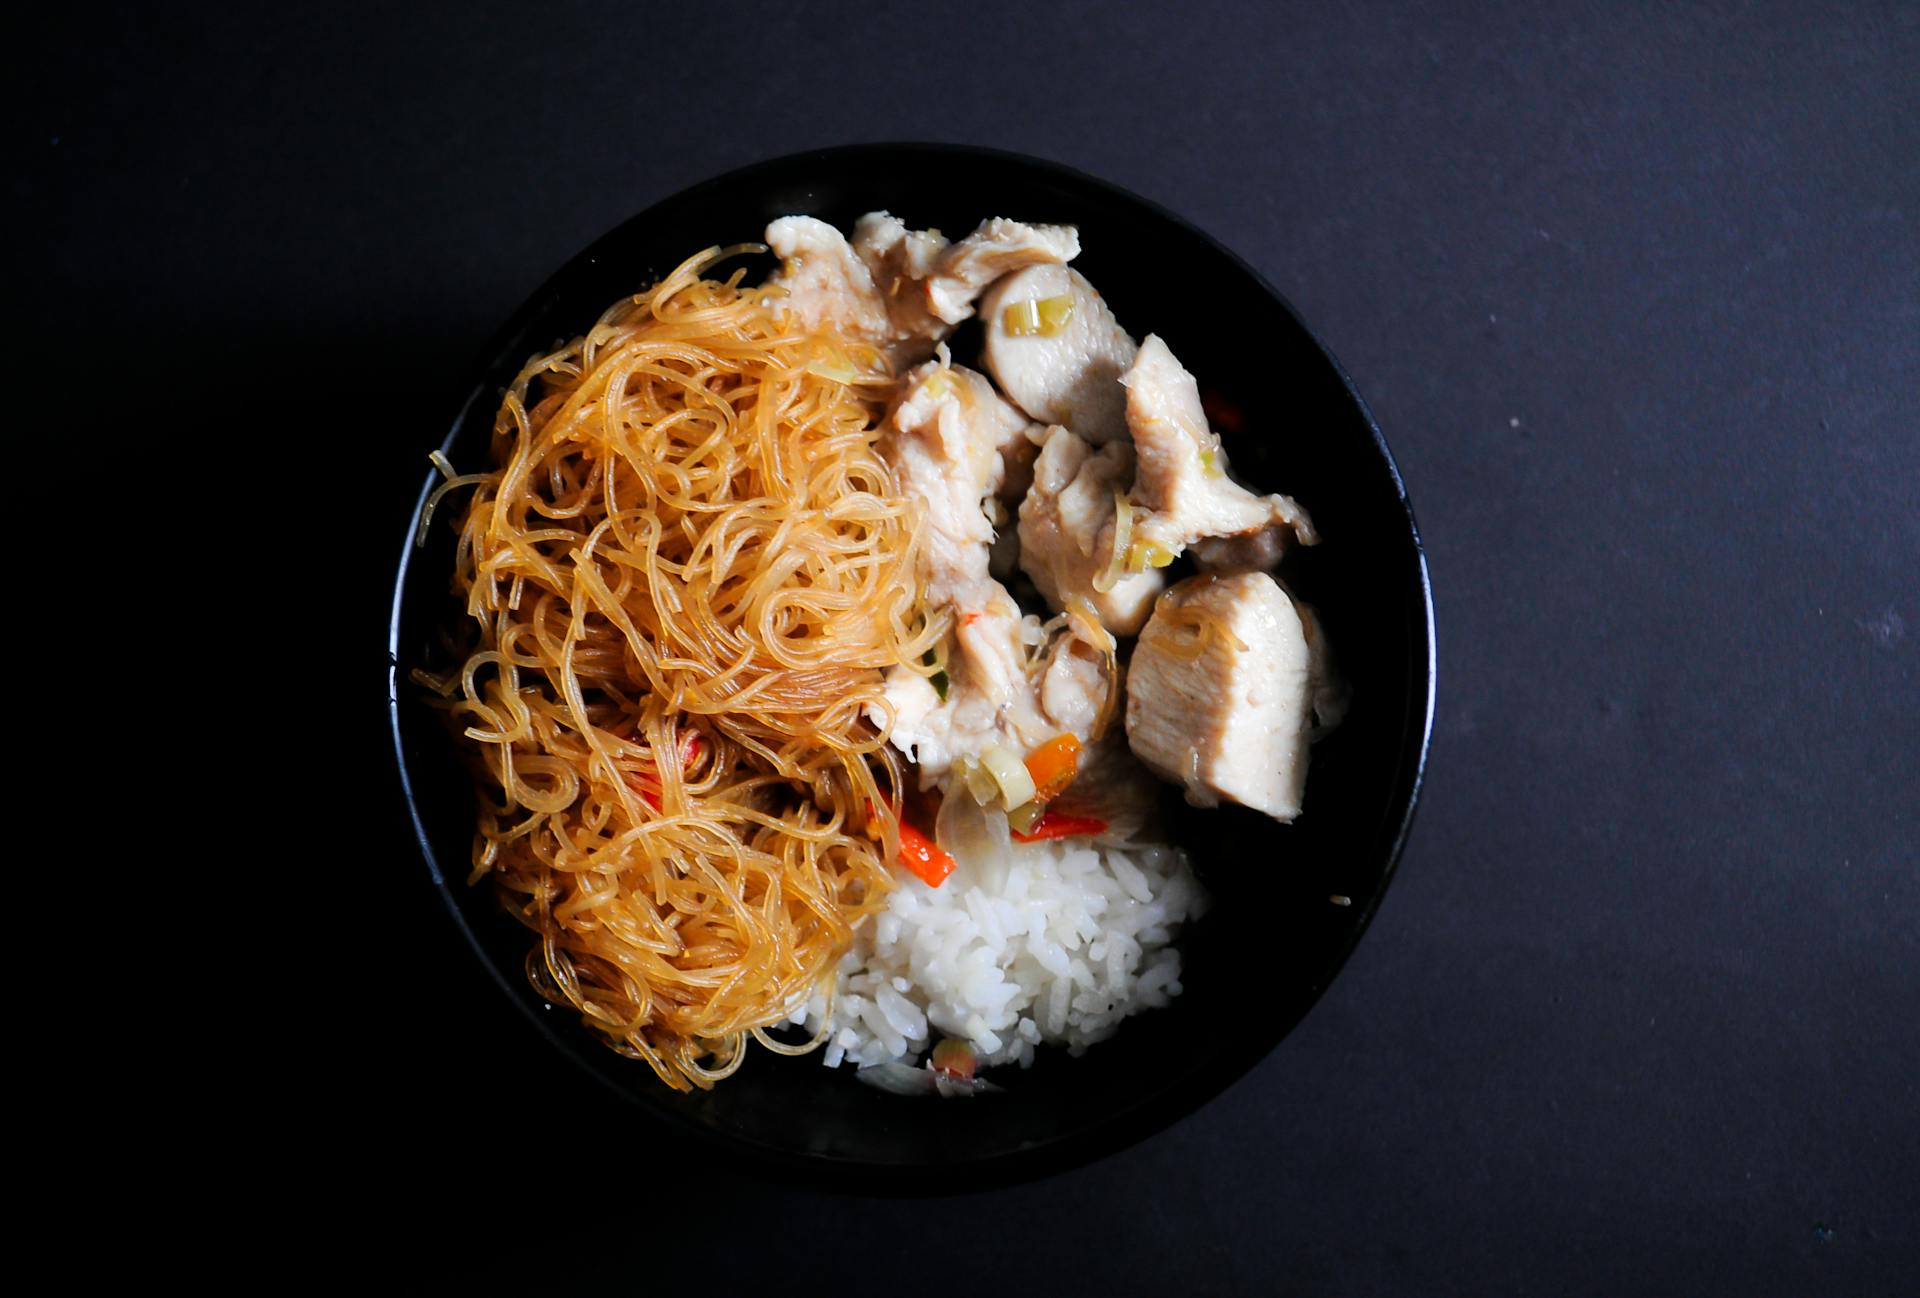 A bowl of rice with noodles | Source: Pexels